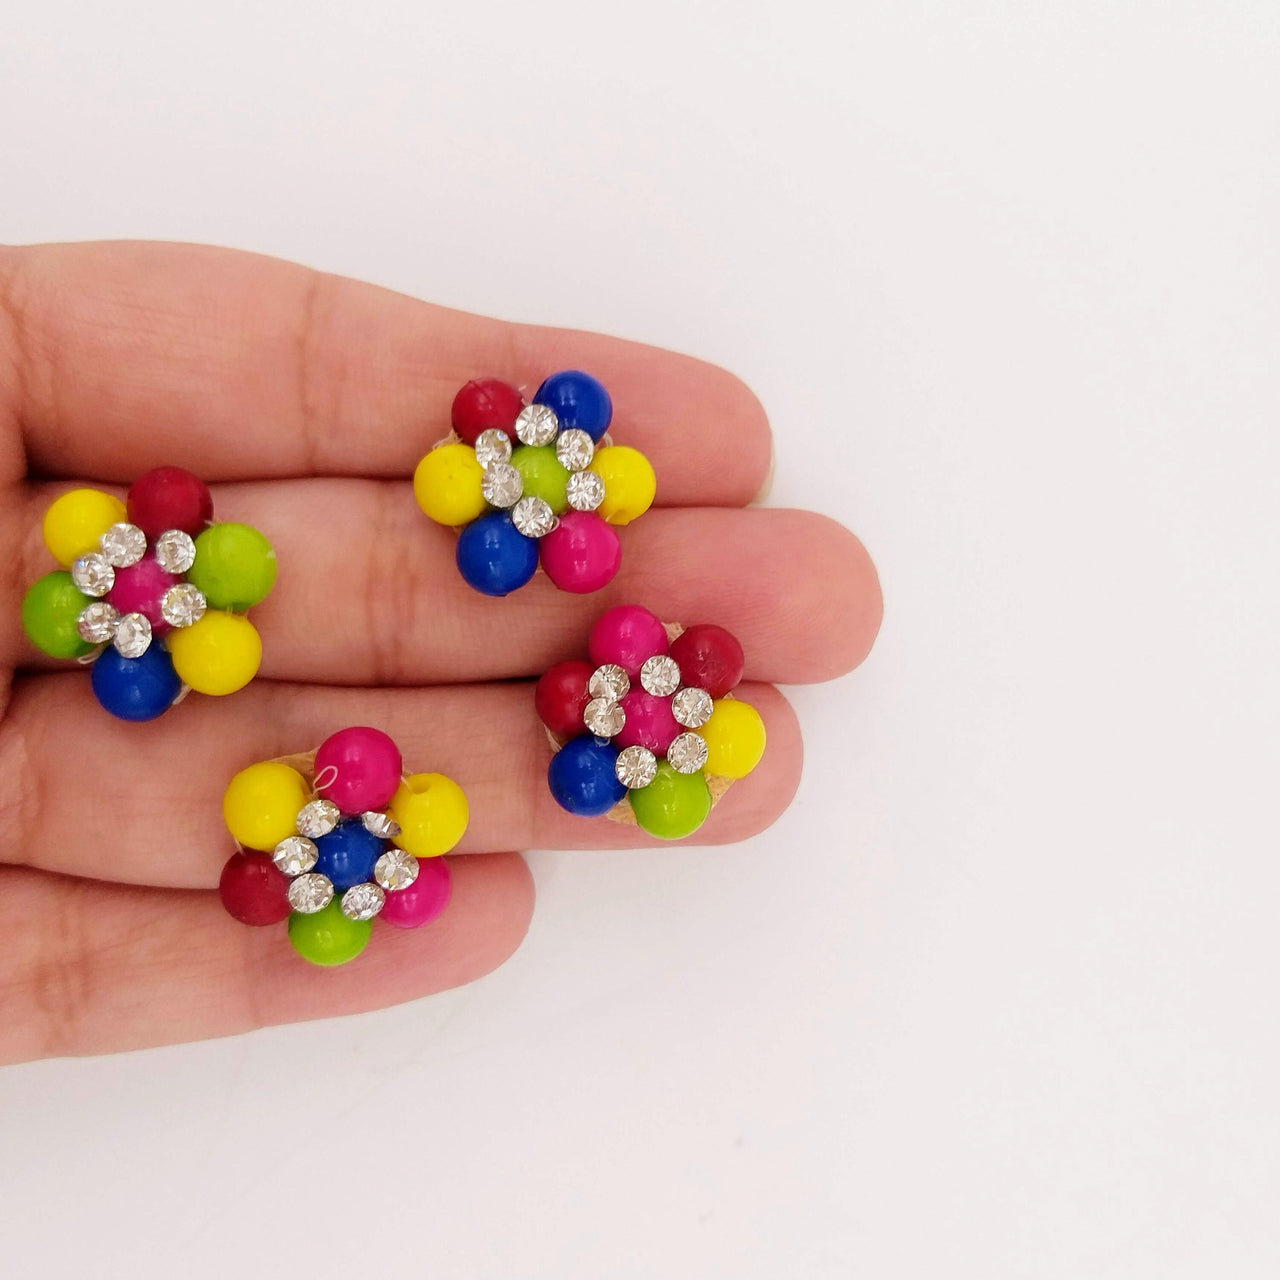 10 Beaded Floral Appliques In Multicoloured Beads and Rhinestones, Floral Appliques, Beaded Applique